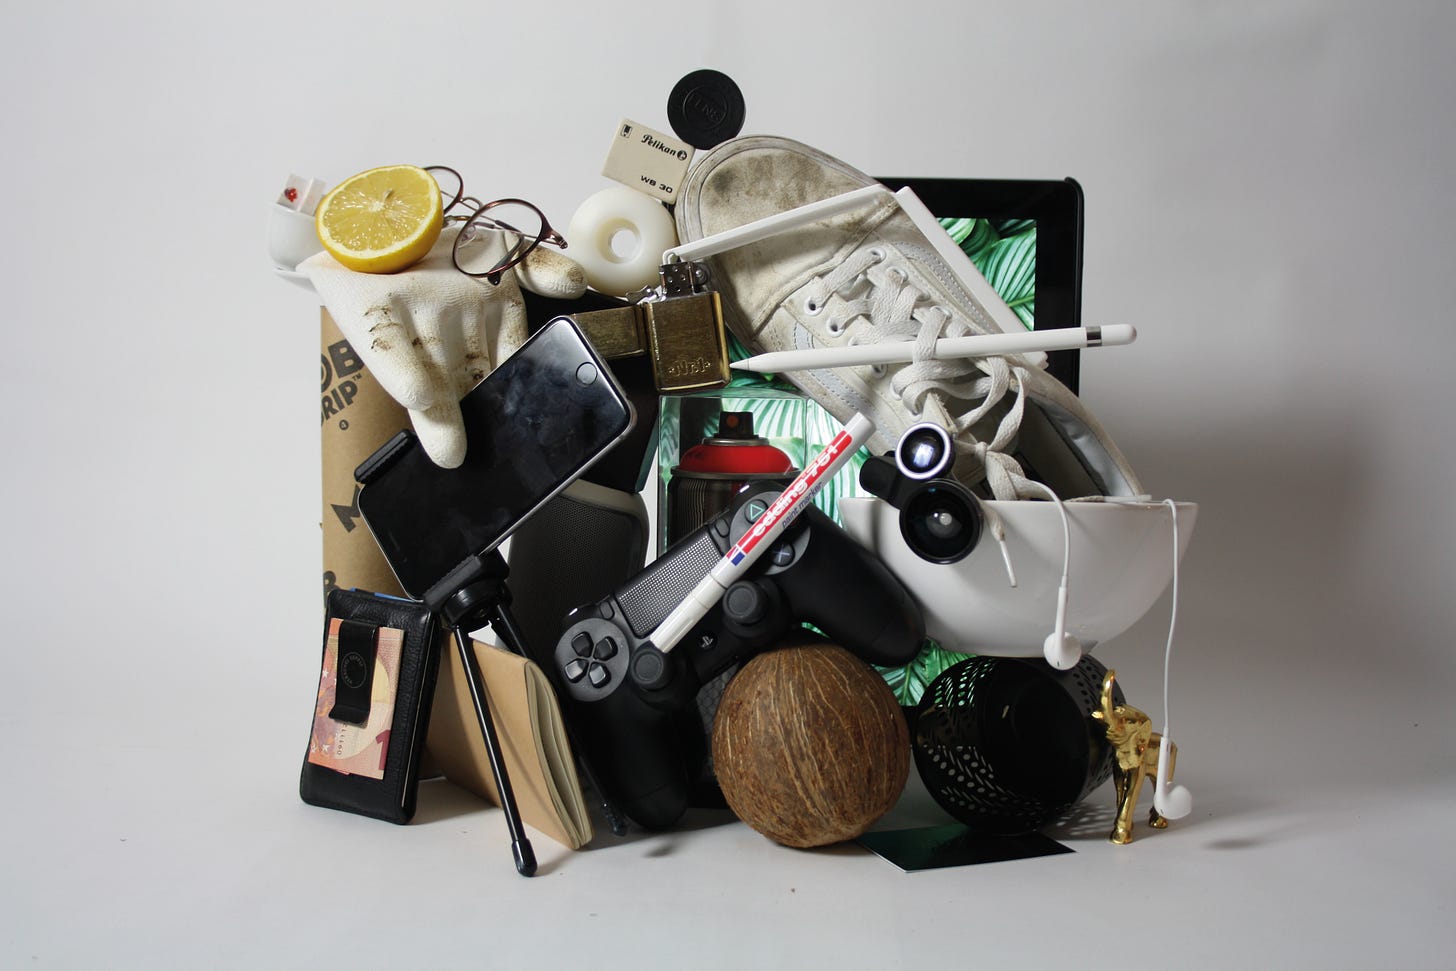 A photograph of a pile of unrelated objects, artfully arranged.